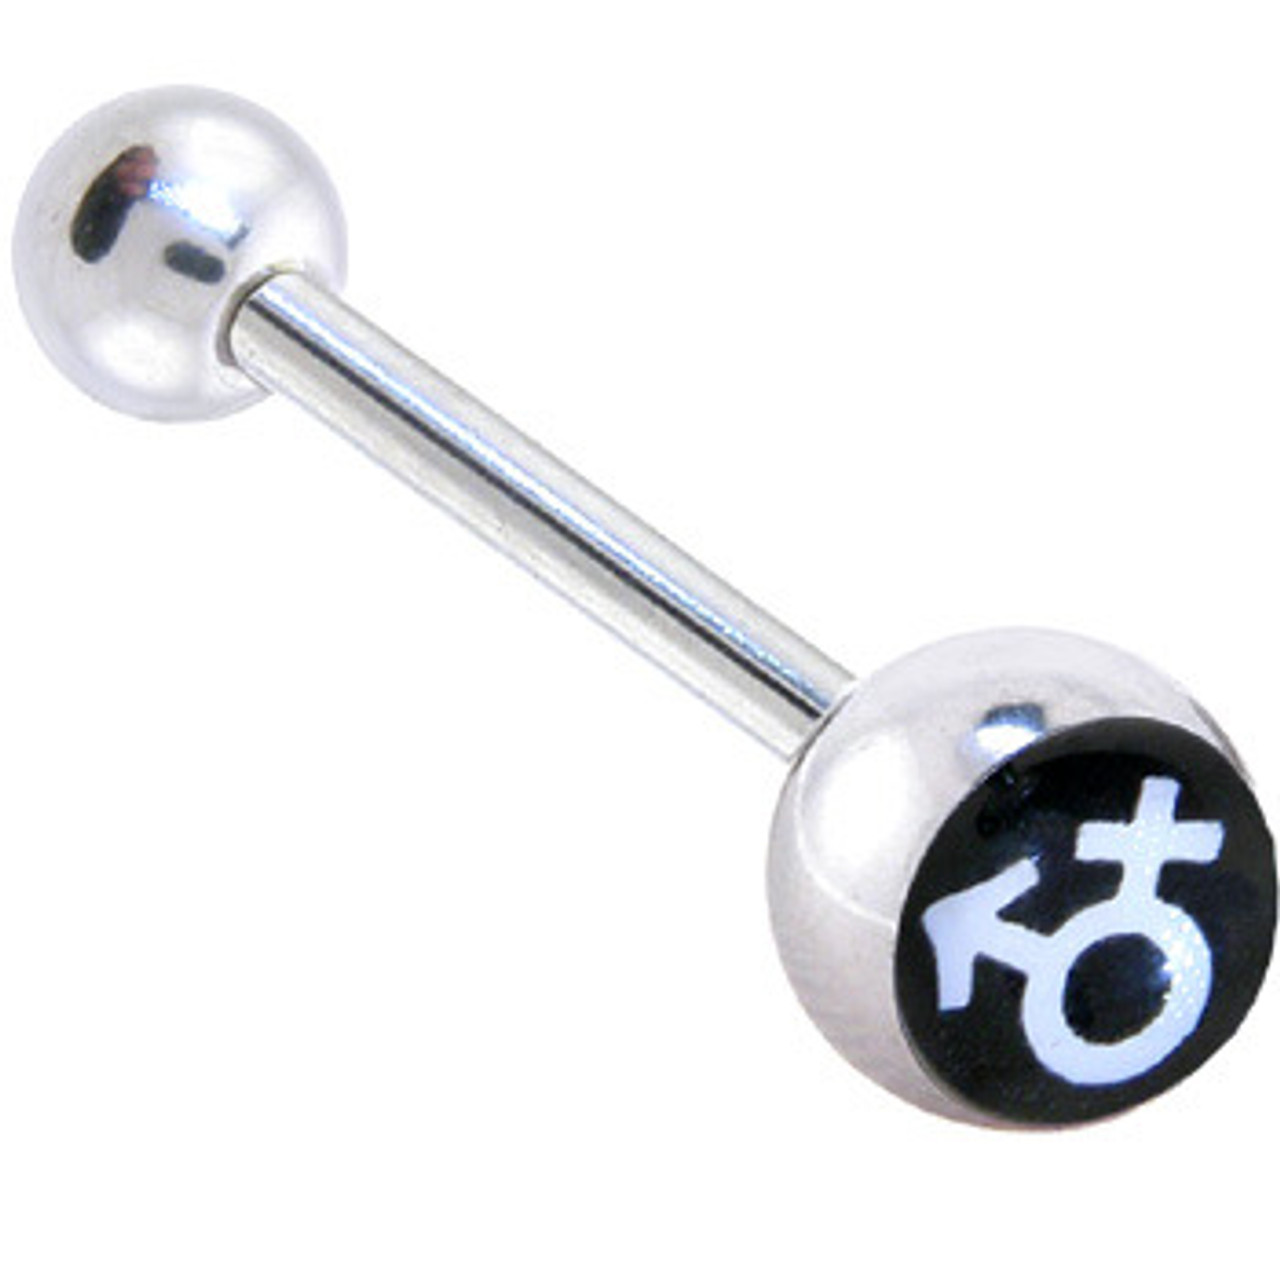 Male Female Symbol Tongue Ring (Black & White) - Supporter LGBT Pride (Tongue Ring/Body Jewelry)
 bi pride tongue ring, pansexual tongue ring, bi pride tongue ring, pan pride tongue ring, bisexual tongue ring, pansexual tongue ring, bisexual tongue ring, , bi pride body jewelry, pan pride body jewelry, trans pride tongue ring, transgender pride tongue ring, trans pride tongue ring, transgender tongue ring, transgender body jewelry, pansexual tongue ring